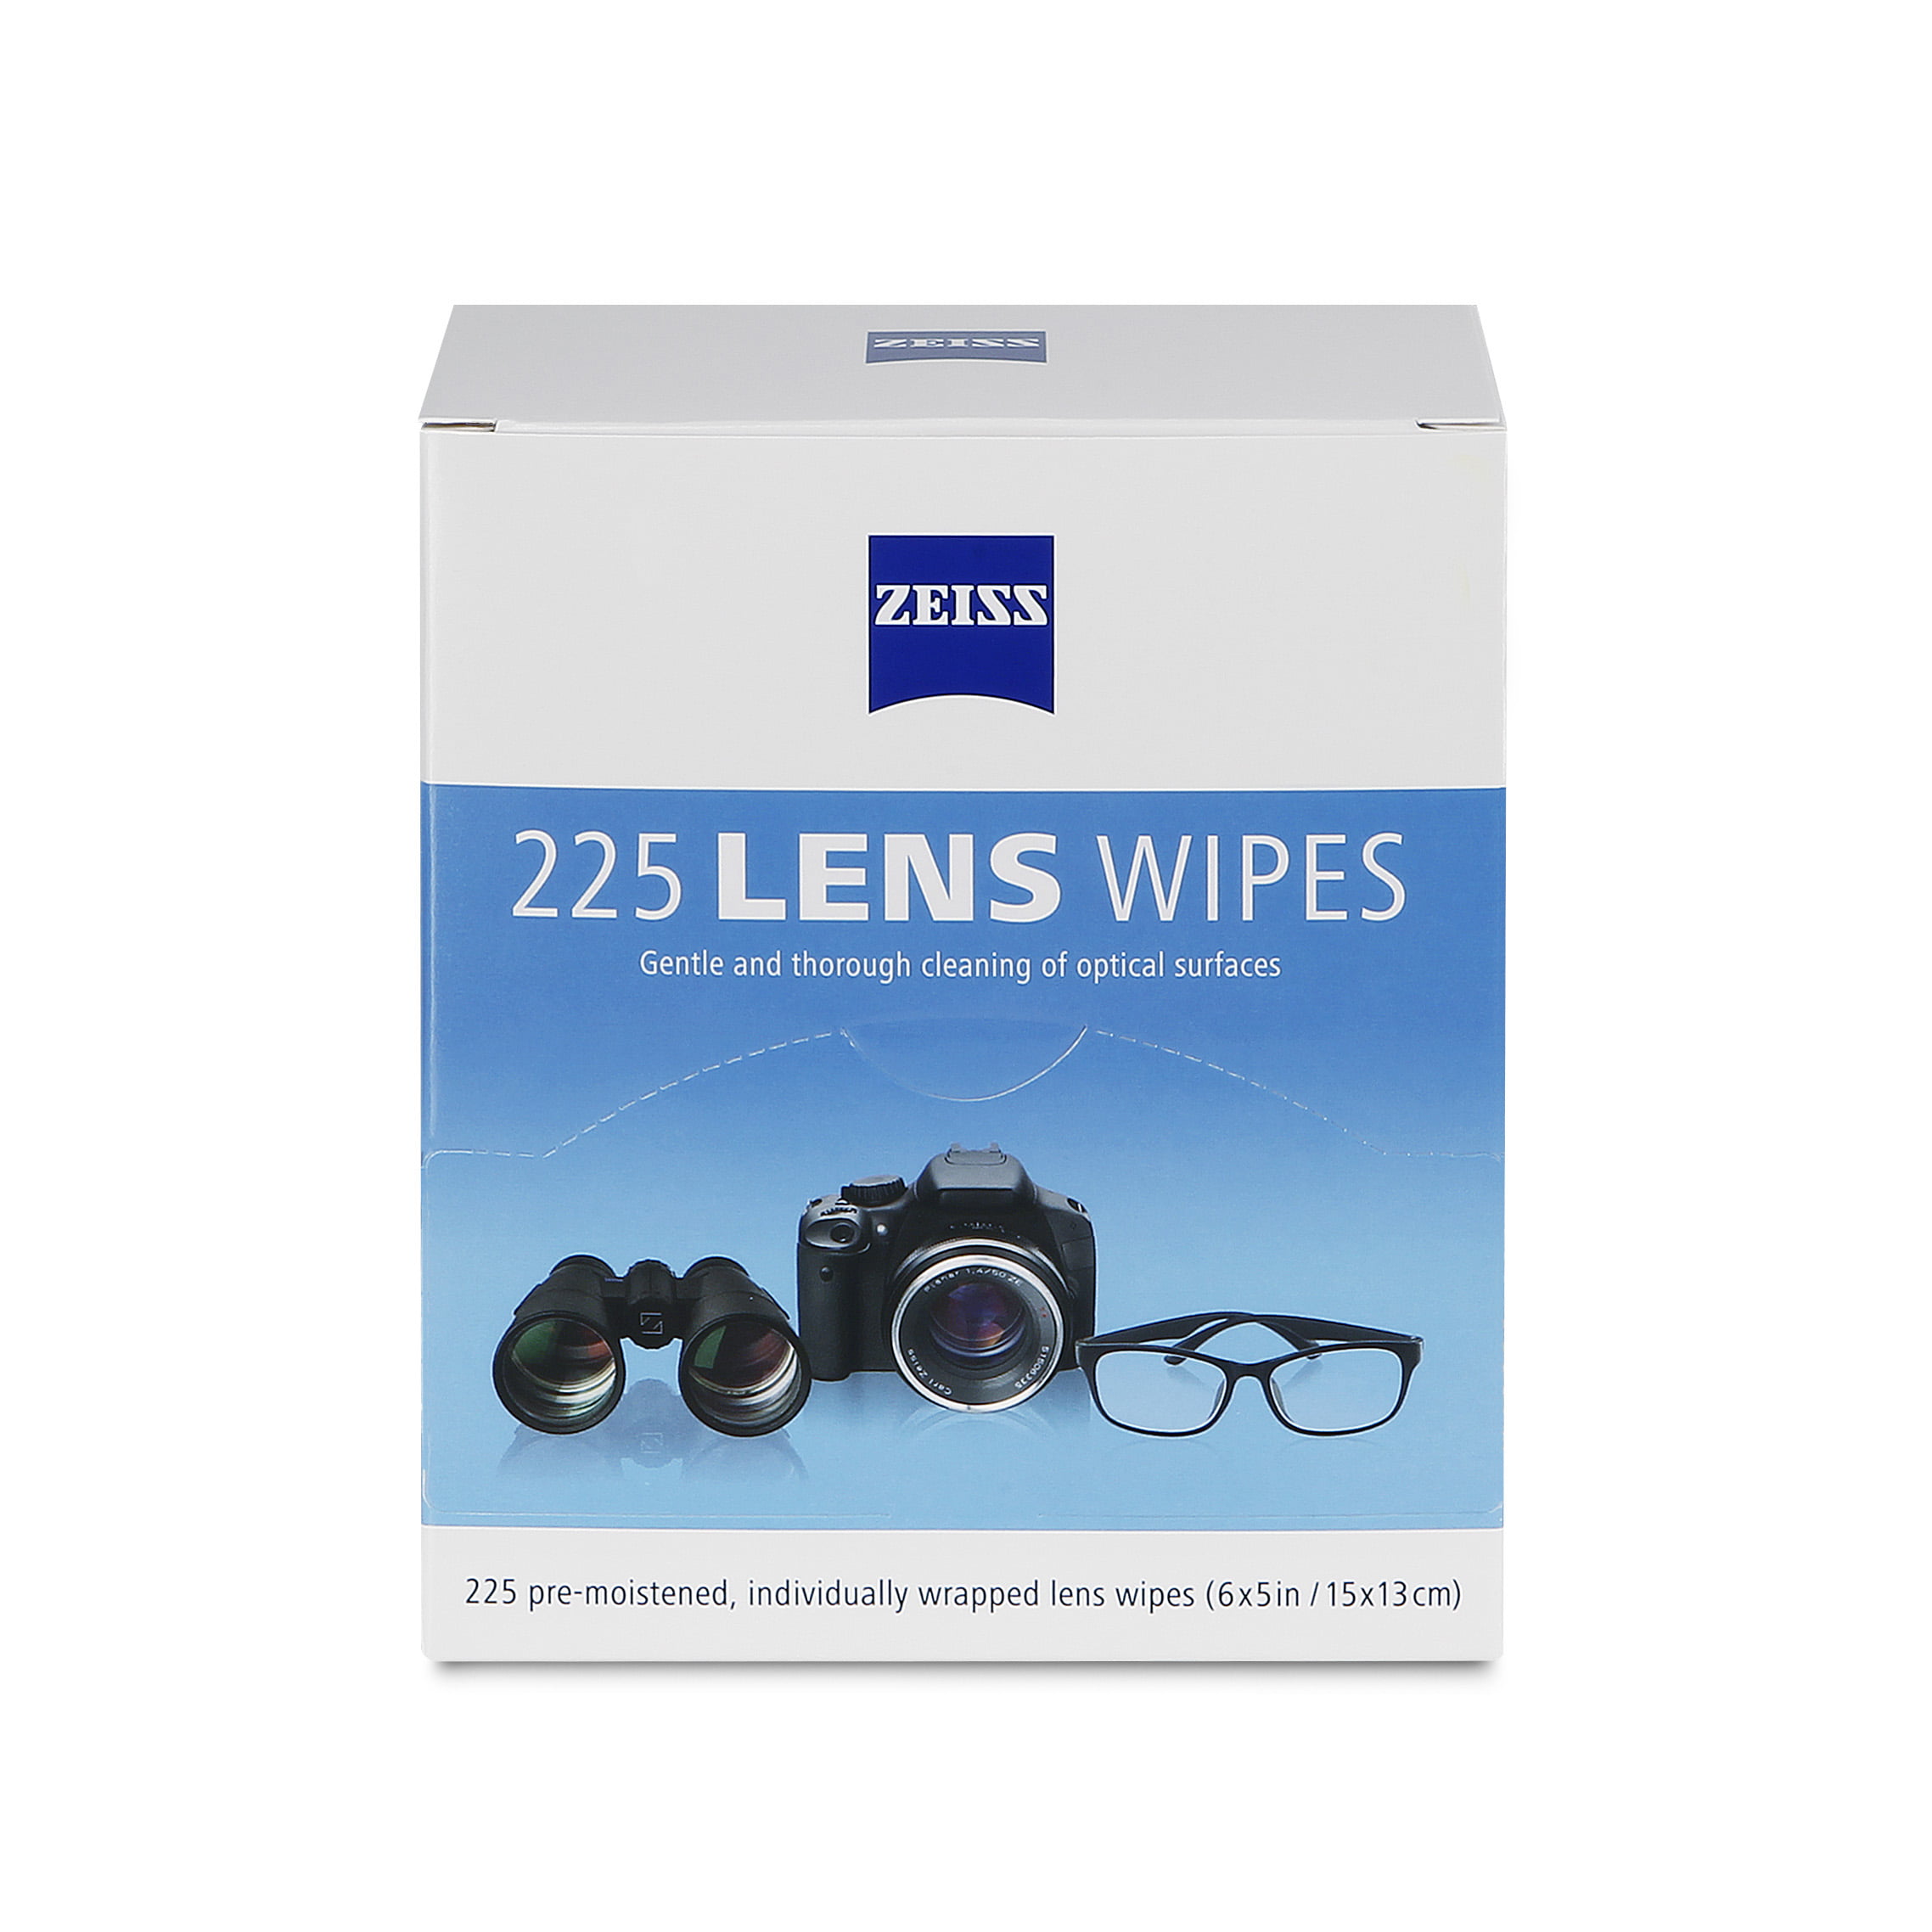 Zeiss Cleaning Lens Wipes Eye Glasses Computer Optical Camera Cleaner Wet paper 